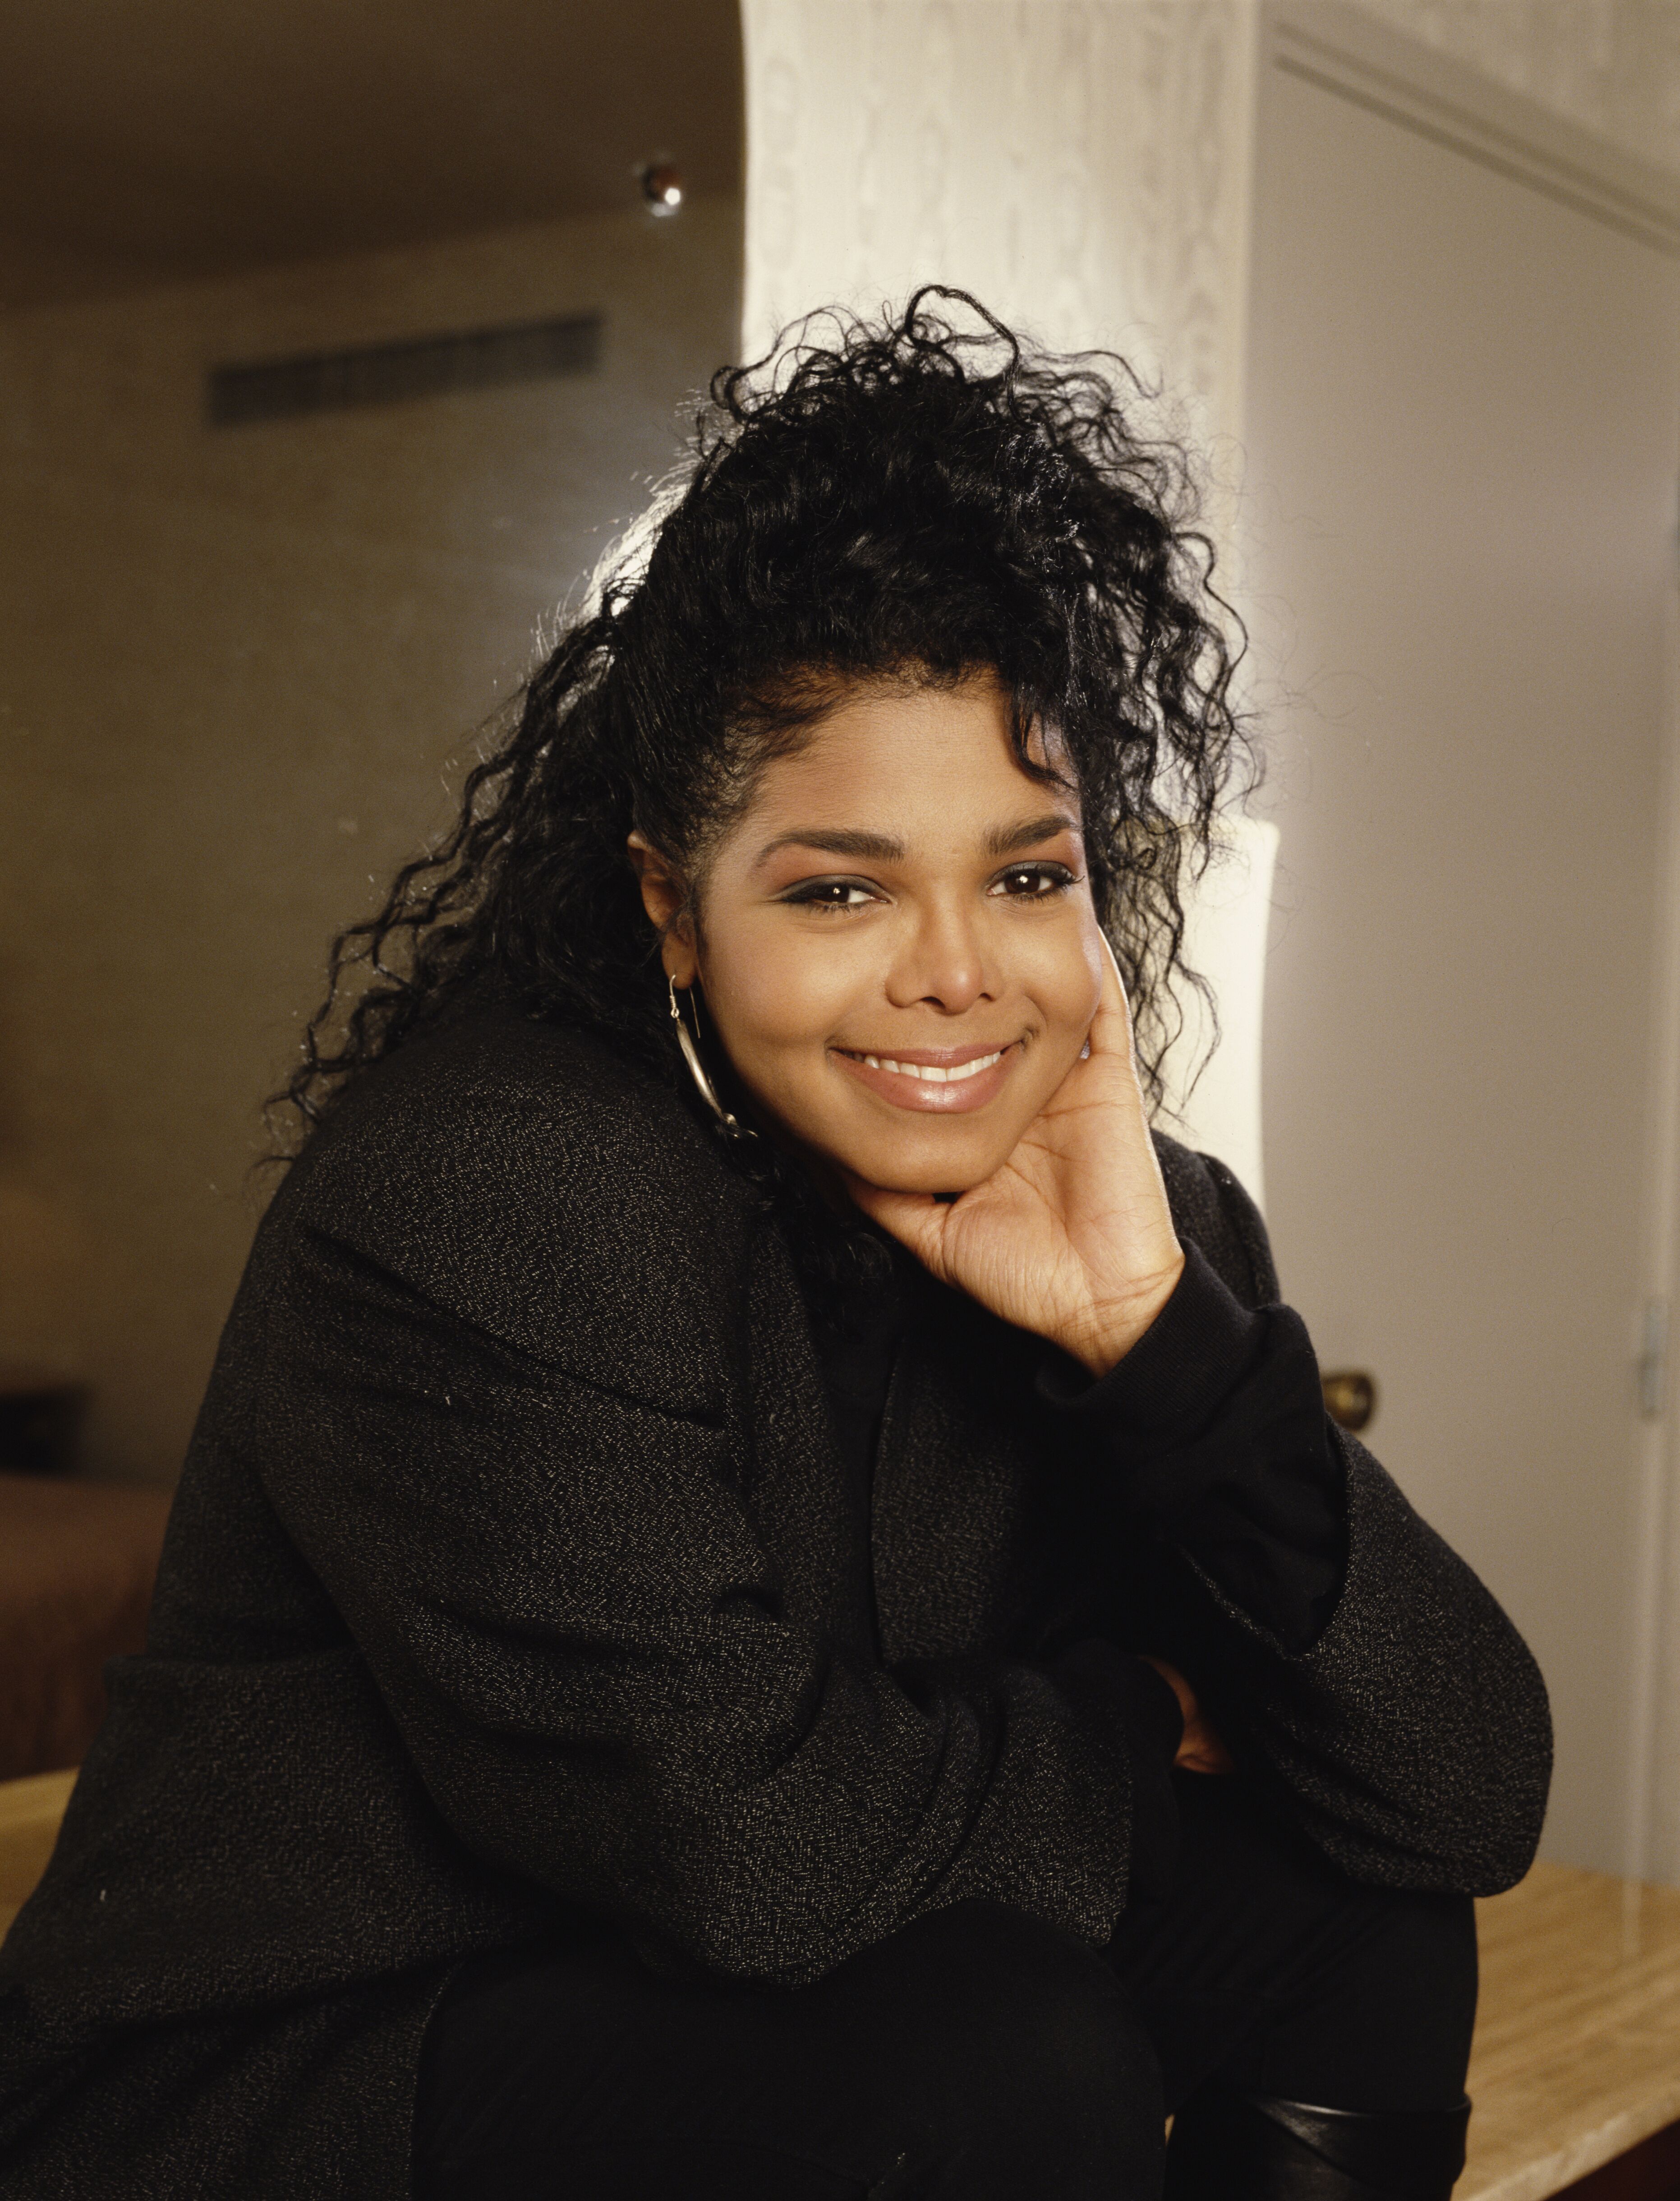 American singer Janet Jackson, circa 1990. | Source: Getty Images